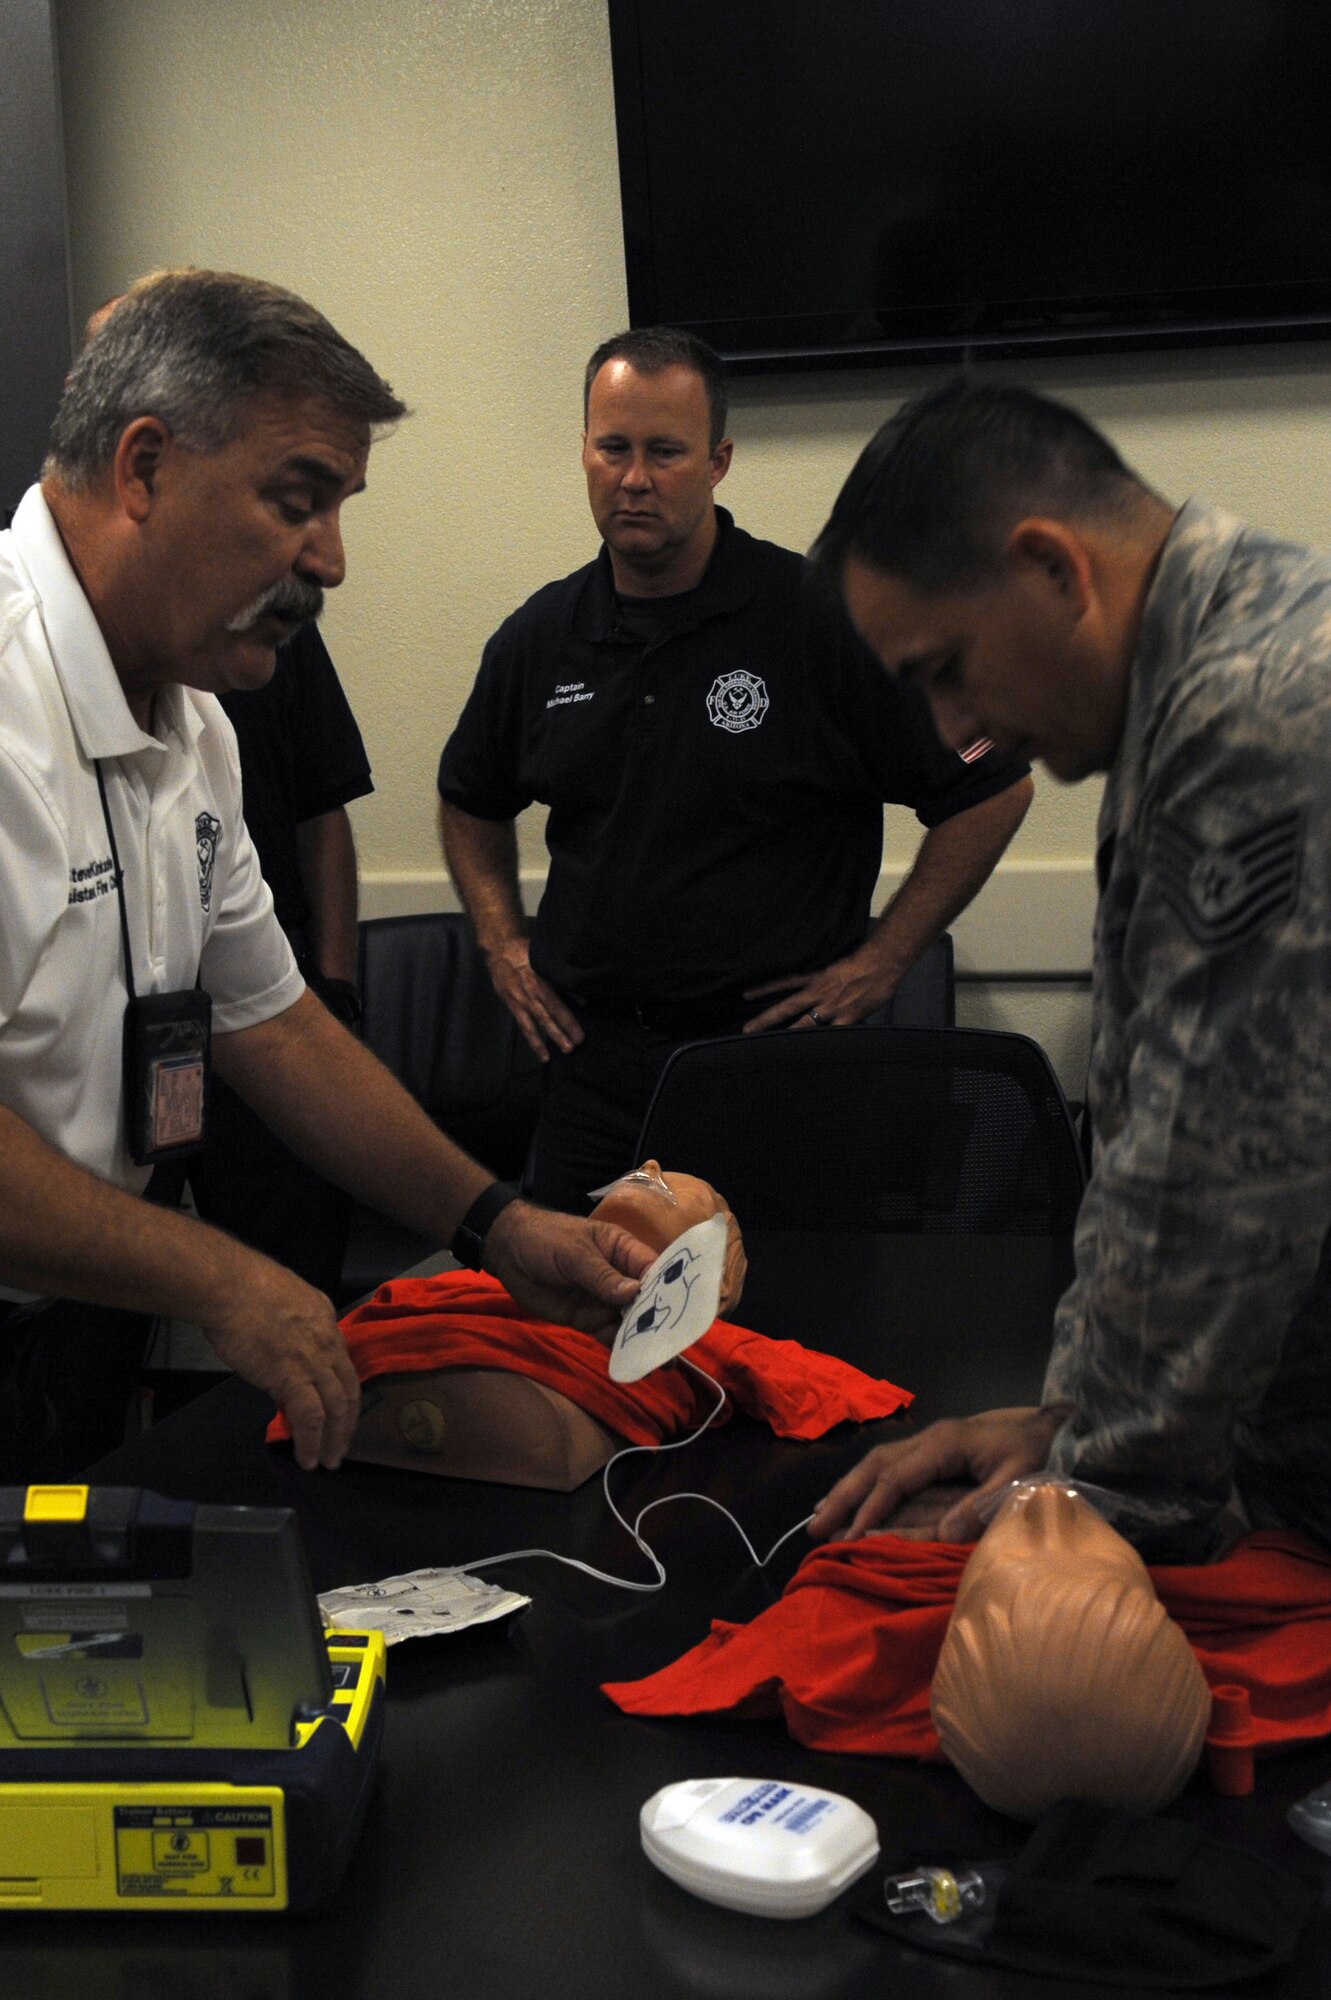 Steven Kinkade, 56th Civil Engineer Squadron assistant fire chief for training, and Tech Sgt. James Hickman, 56th CES fire fighter, demonstrate how to use an automated external defibrillator Sept. 20, 2016, at Luke Air Force Base, Ariz. Proper use of an AED is a core requirement for the CPR recertification class. (U.S. Air Force Photos by Airman 1st Class Pedro Mota)